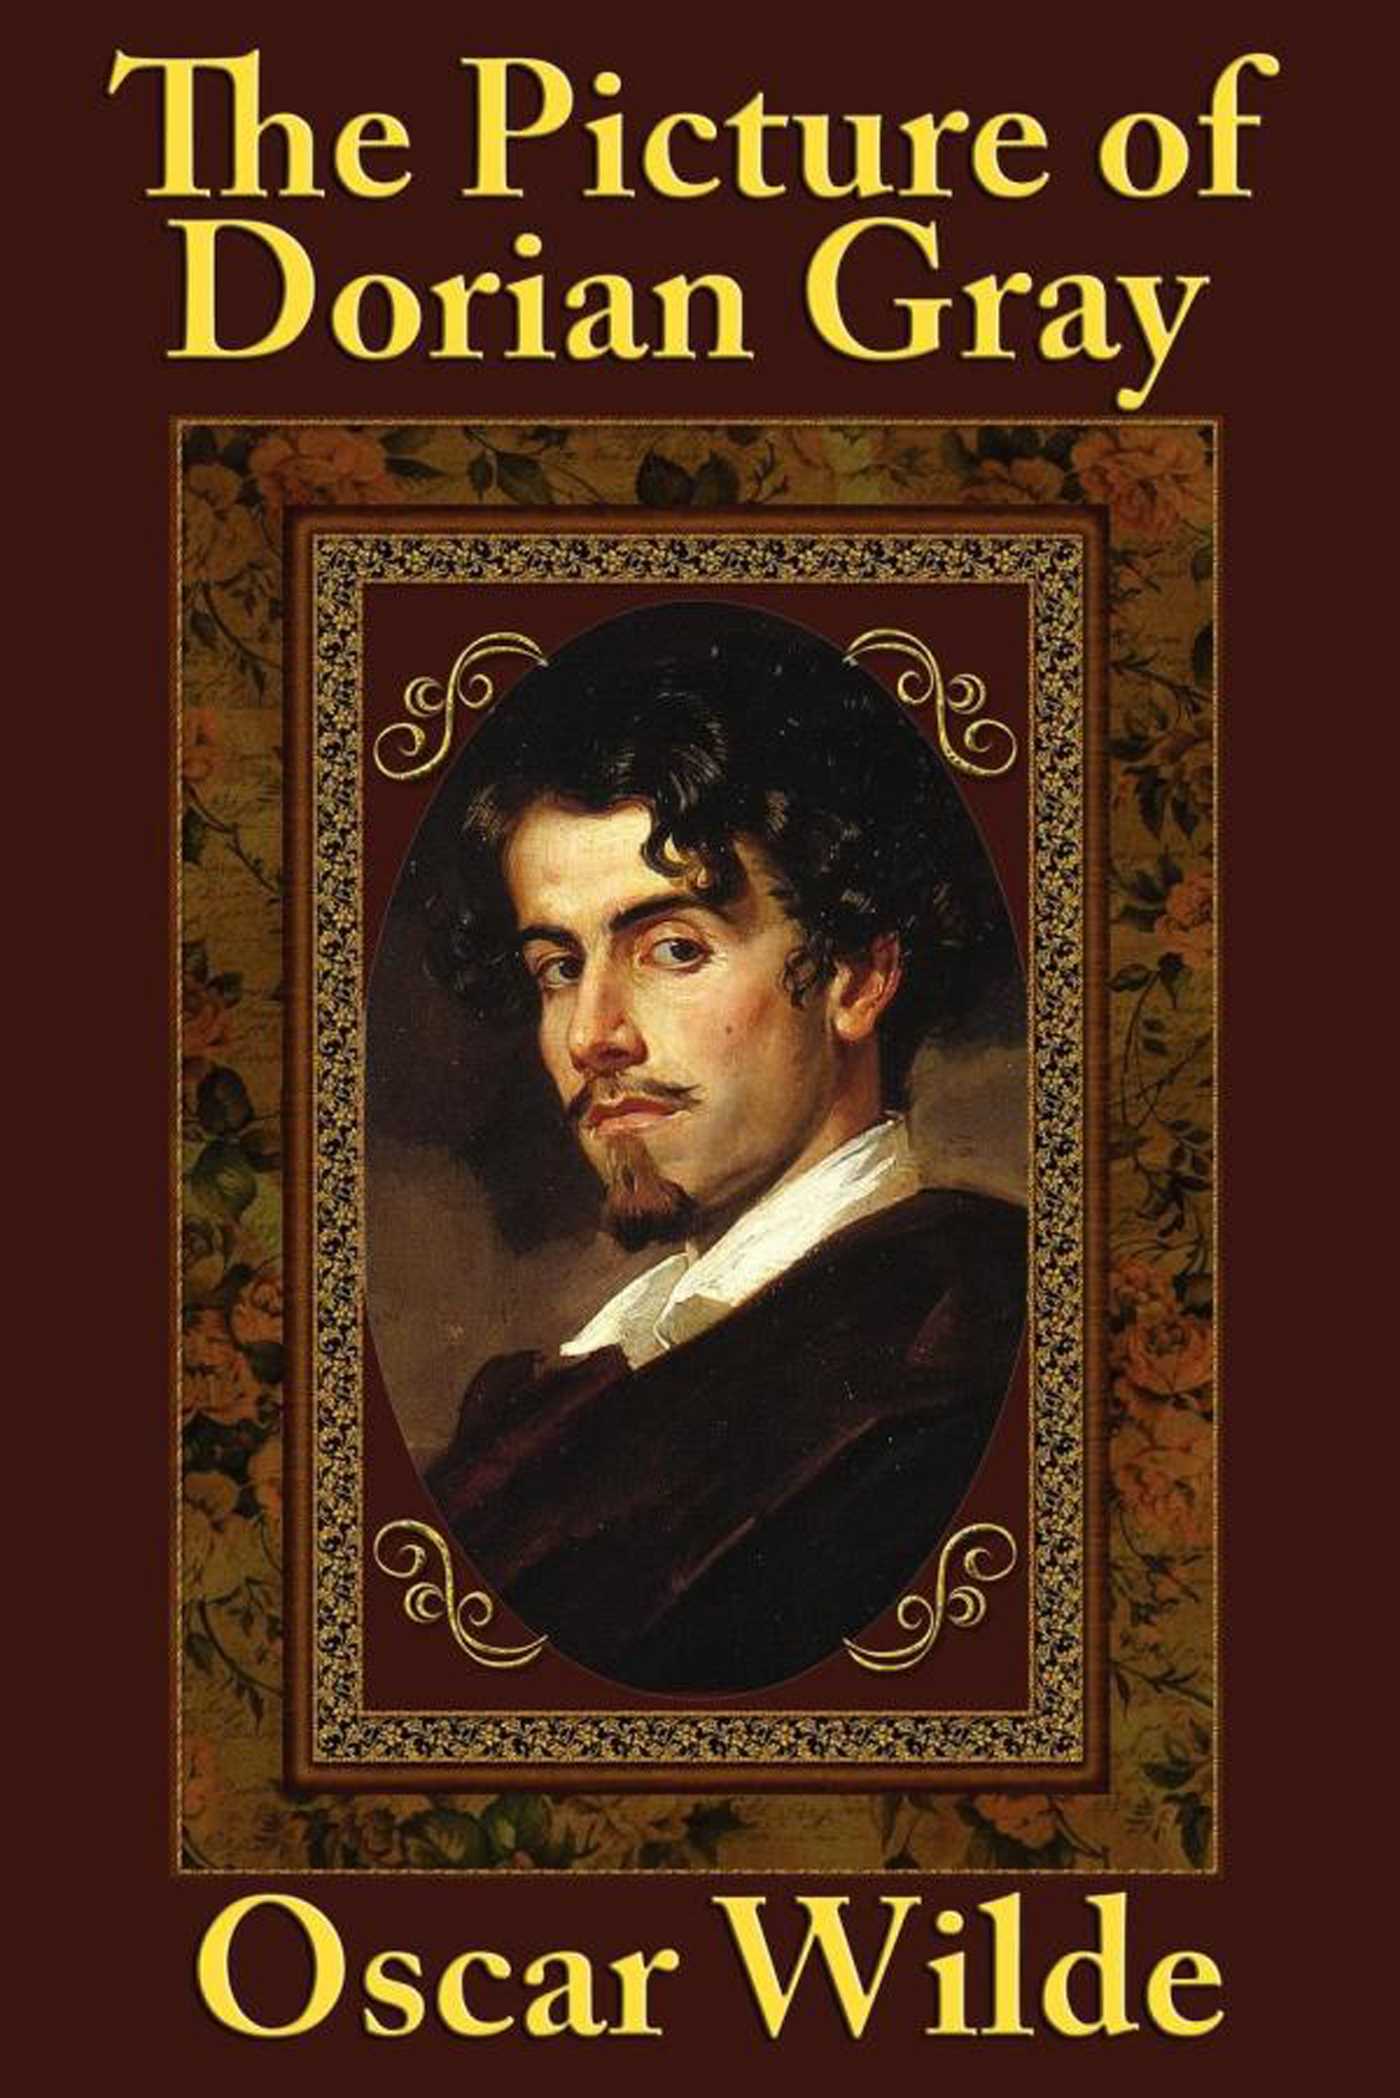 Book cover of Oscar Wilde'S THE PICTURE OF DORIAN GRAY.